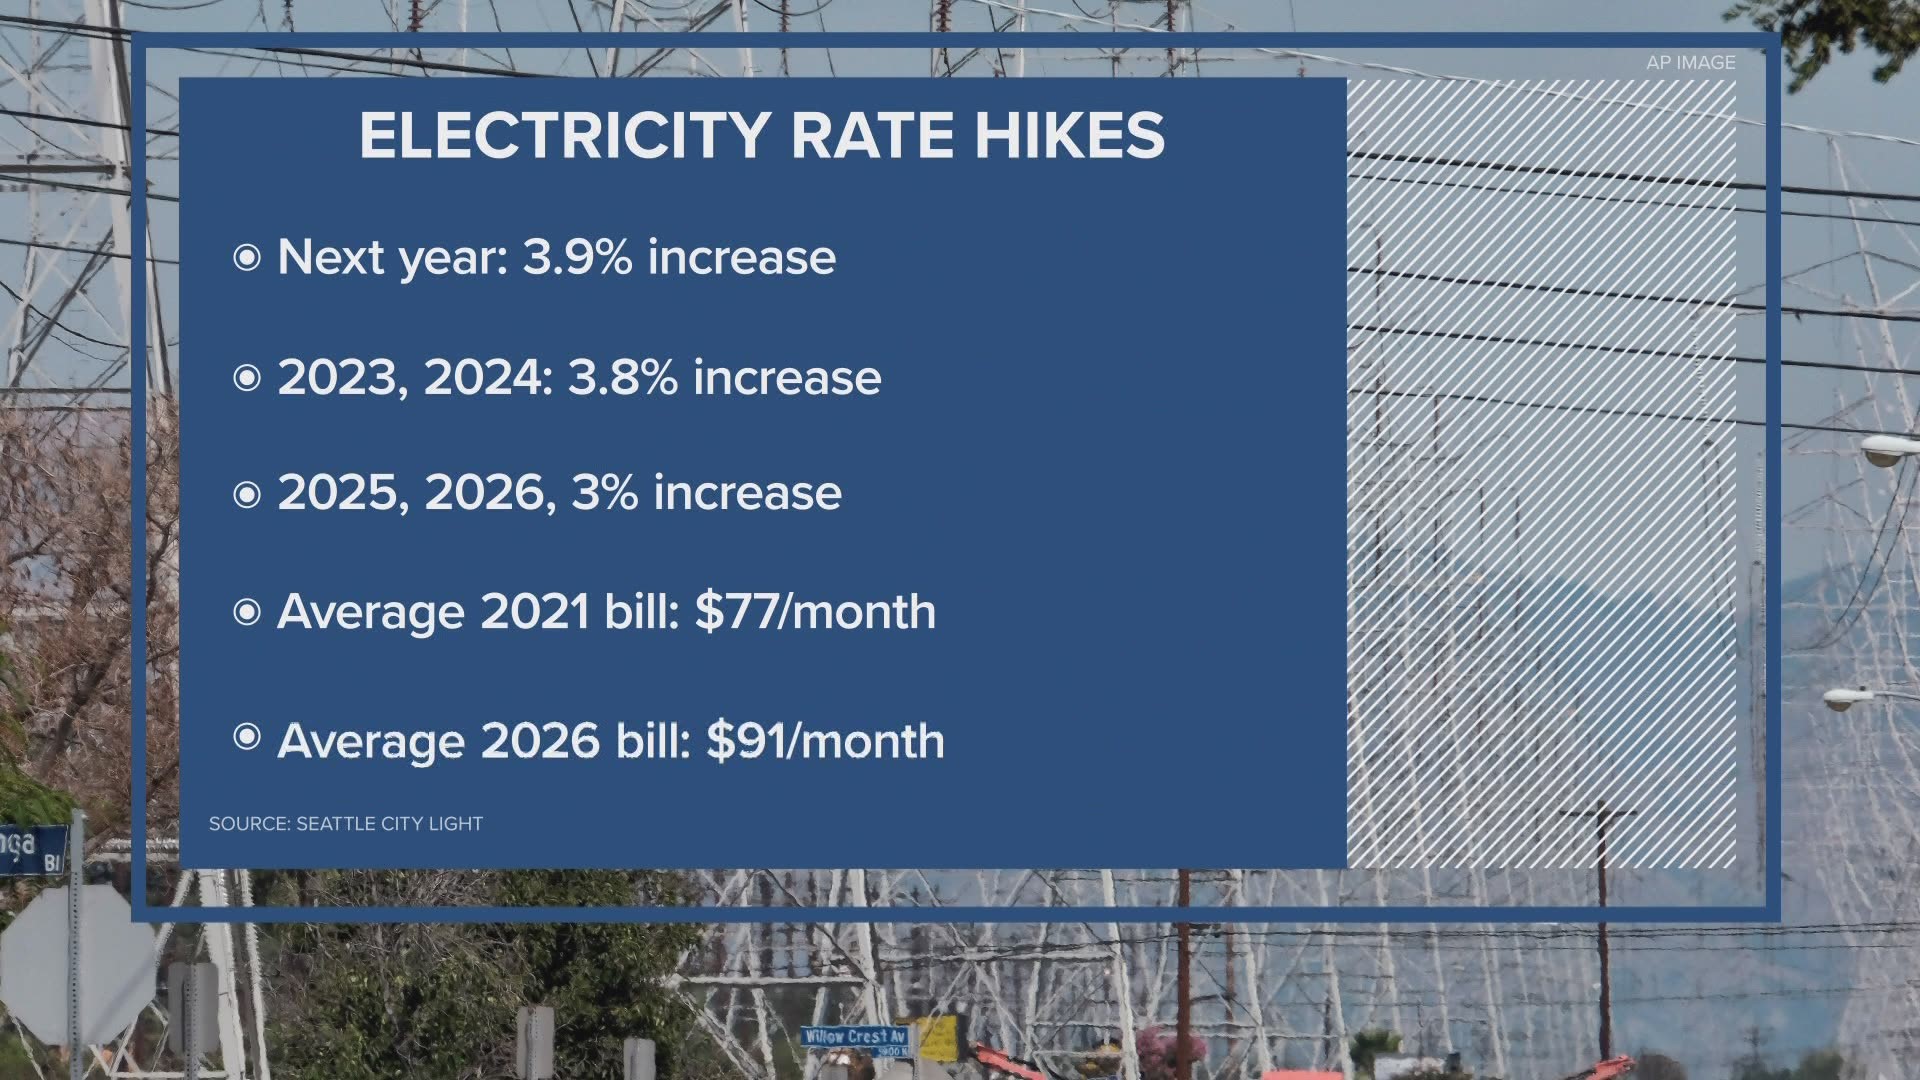 Seattle City Council approved a plan to allow Seattle City Light to increase utility rates over the next five years.